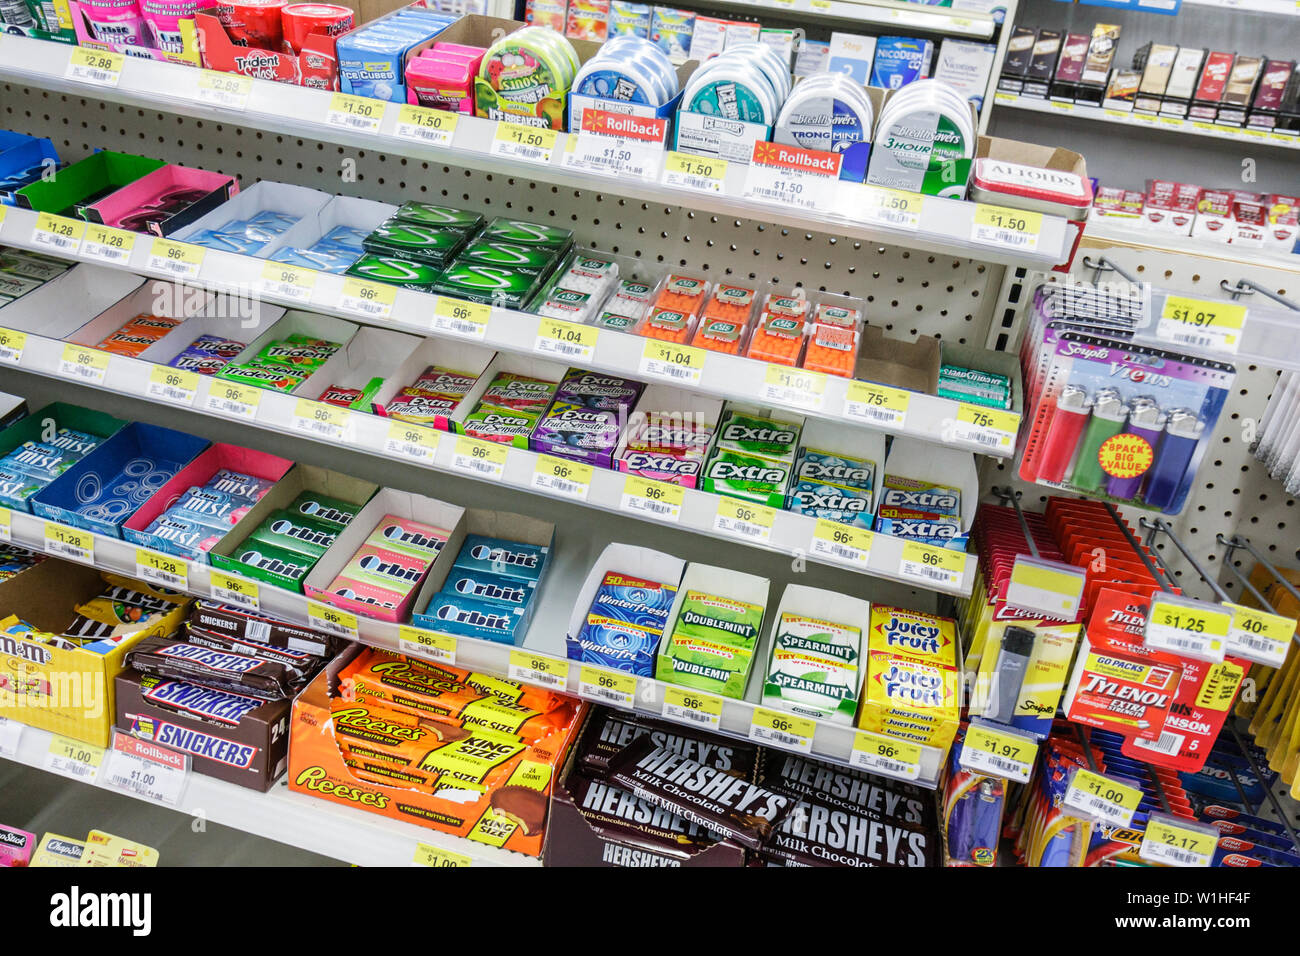 Naples Florida,Walmart Big-Box,global company,chain,discount department  store,retail,checkout aisle,gum,mint,chocolate bar  bars,packaging,competition Stock Photo - Alamy